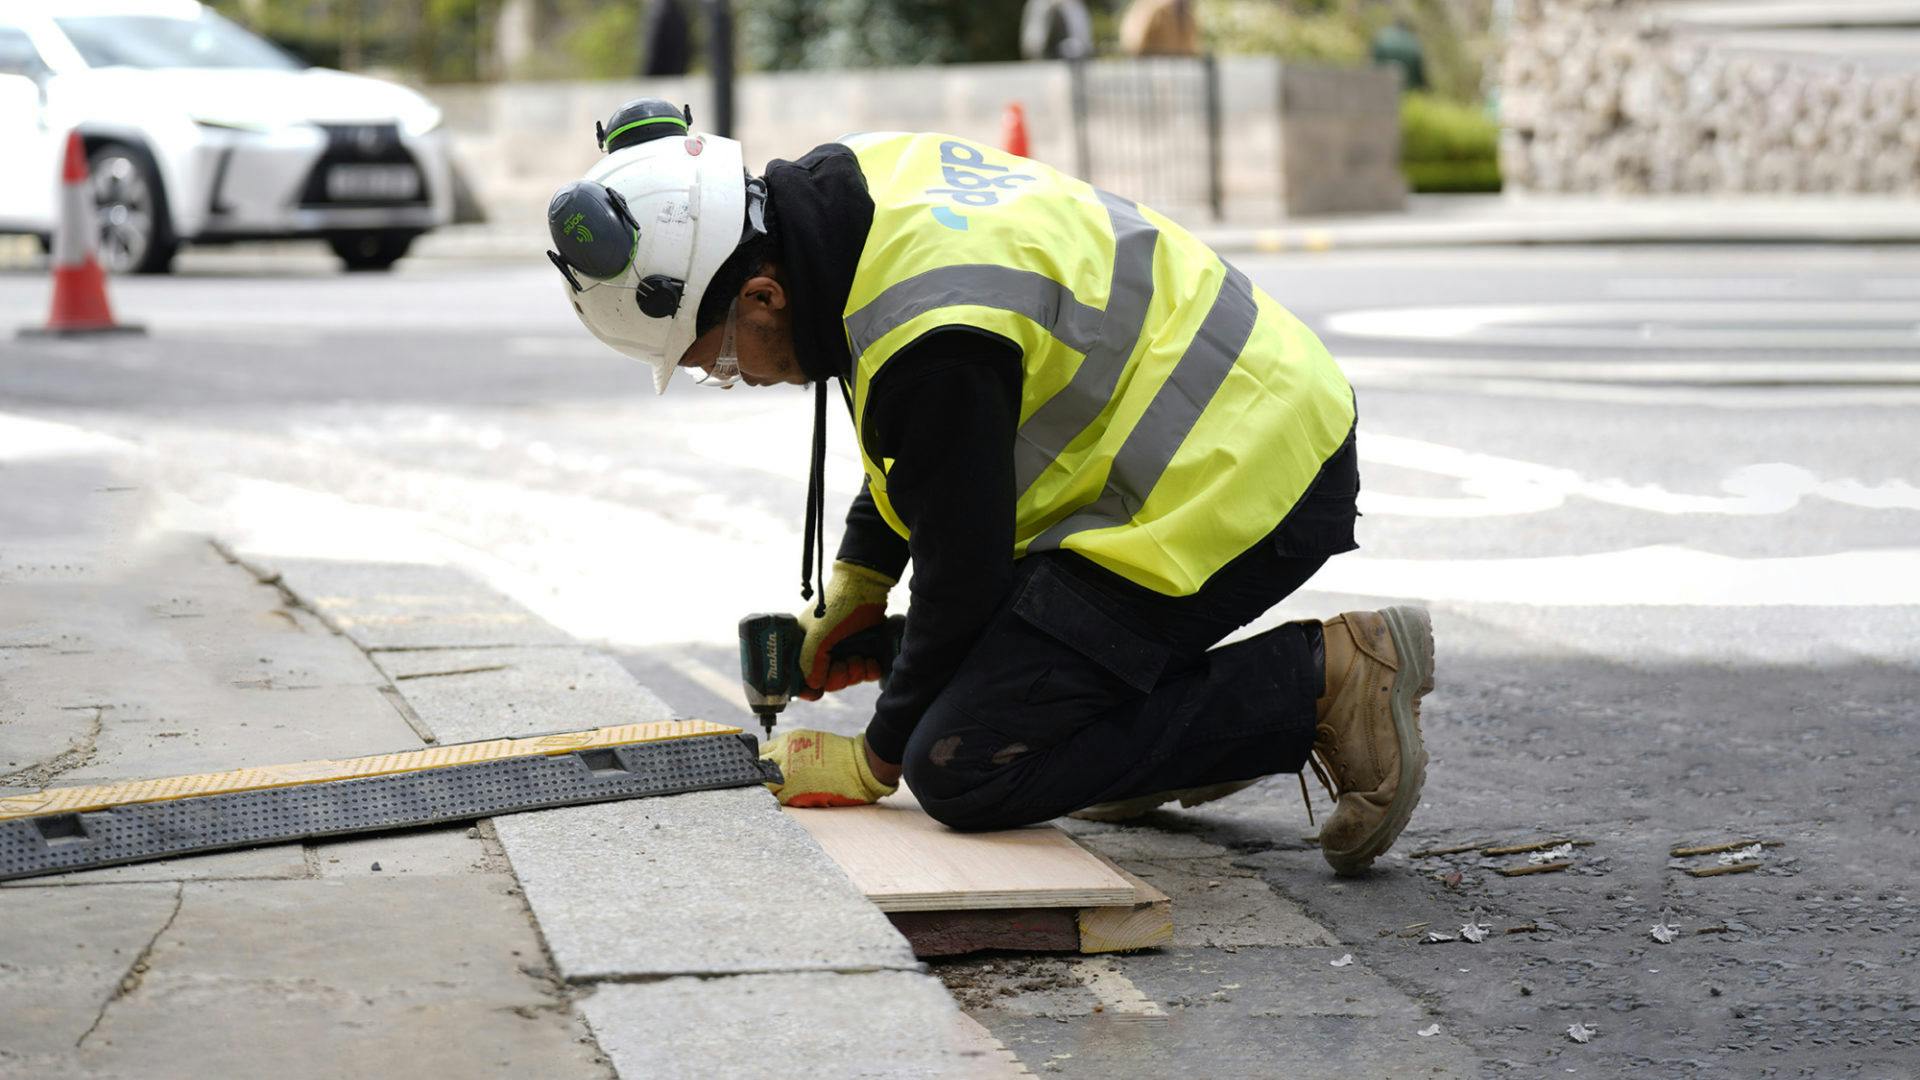 Construction worker in PPE securing a cable ramp to the pavement